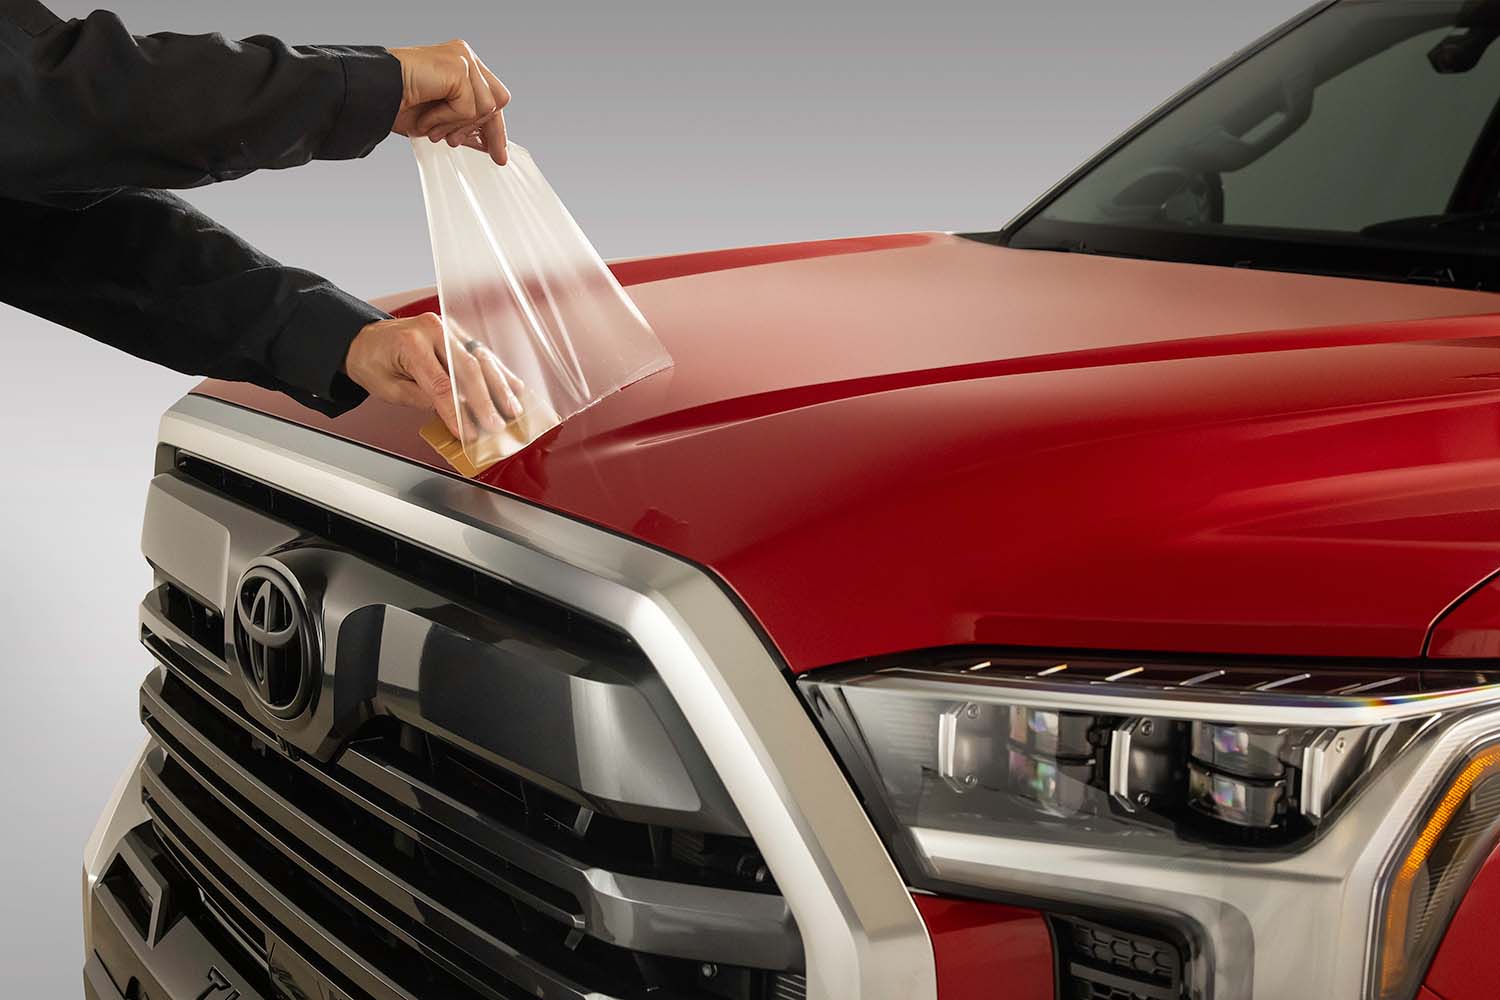 Accessories that help keep your Toyota protected at Bennett Toyota in Allentown, PA | Paint protection film on a new Toyota Tundra